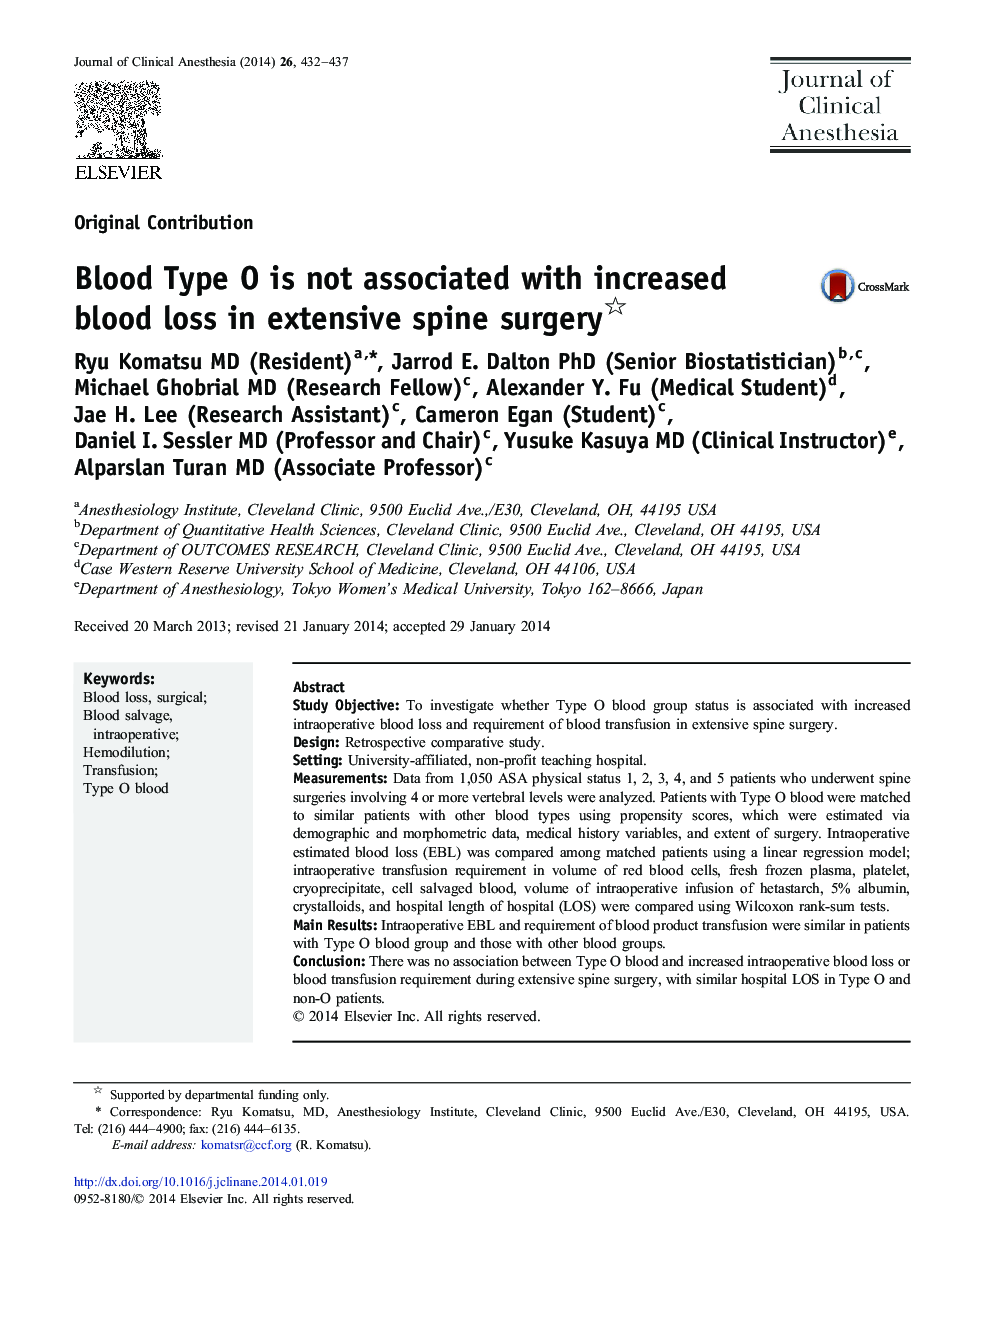 Blood Type O is not associated with increased blood loss in extensive spine surgery